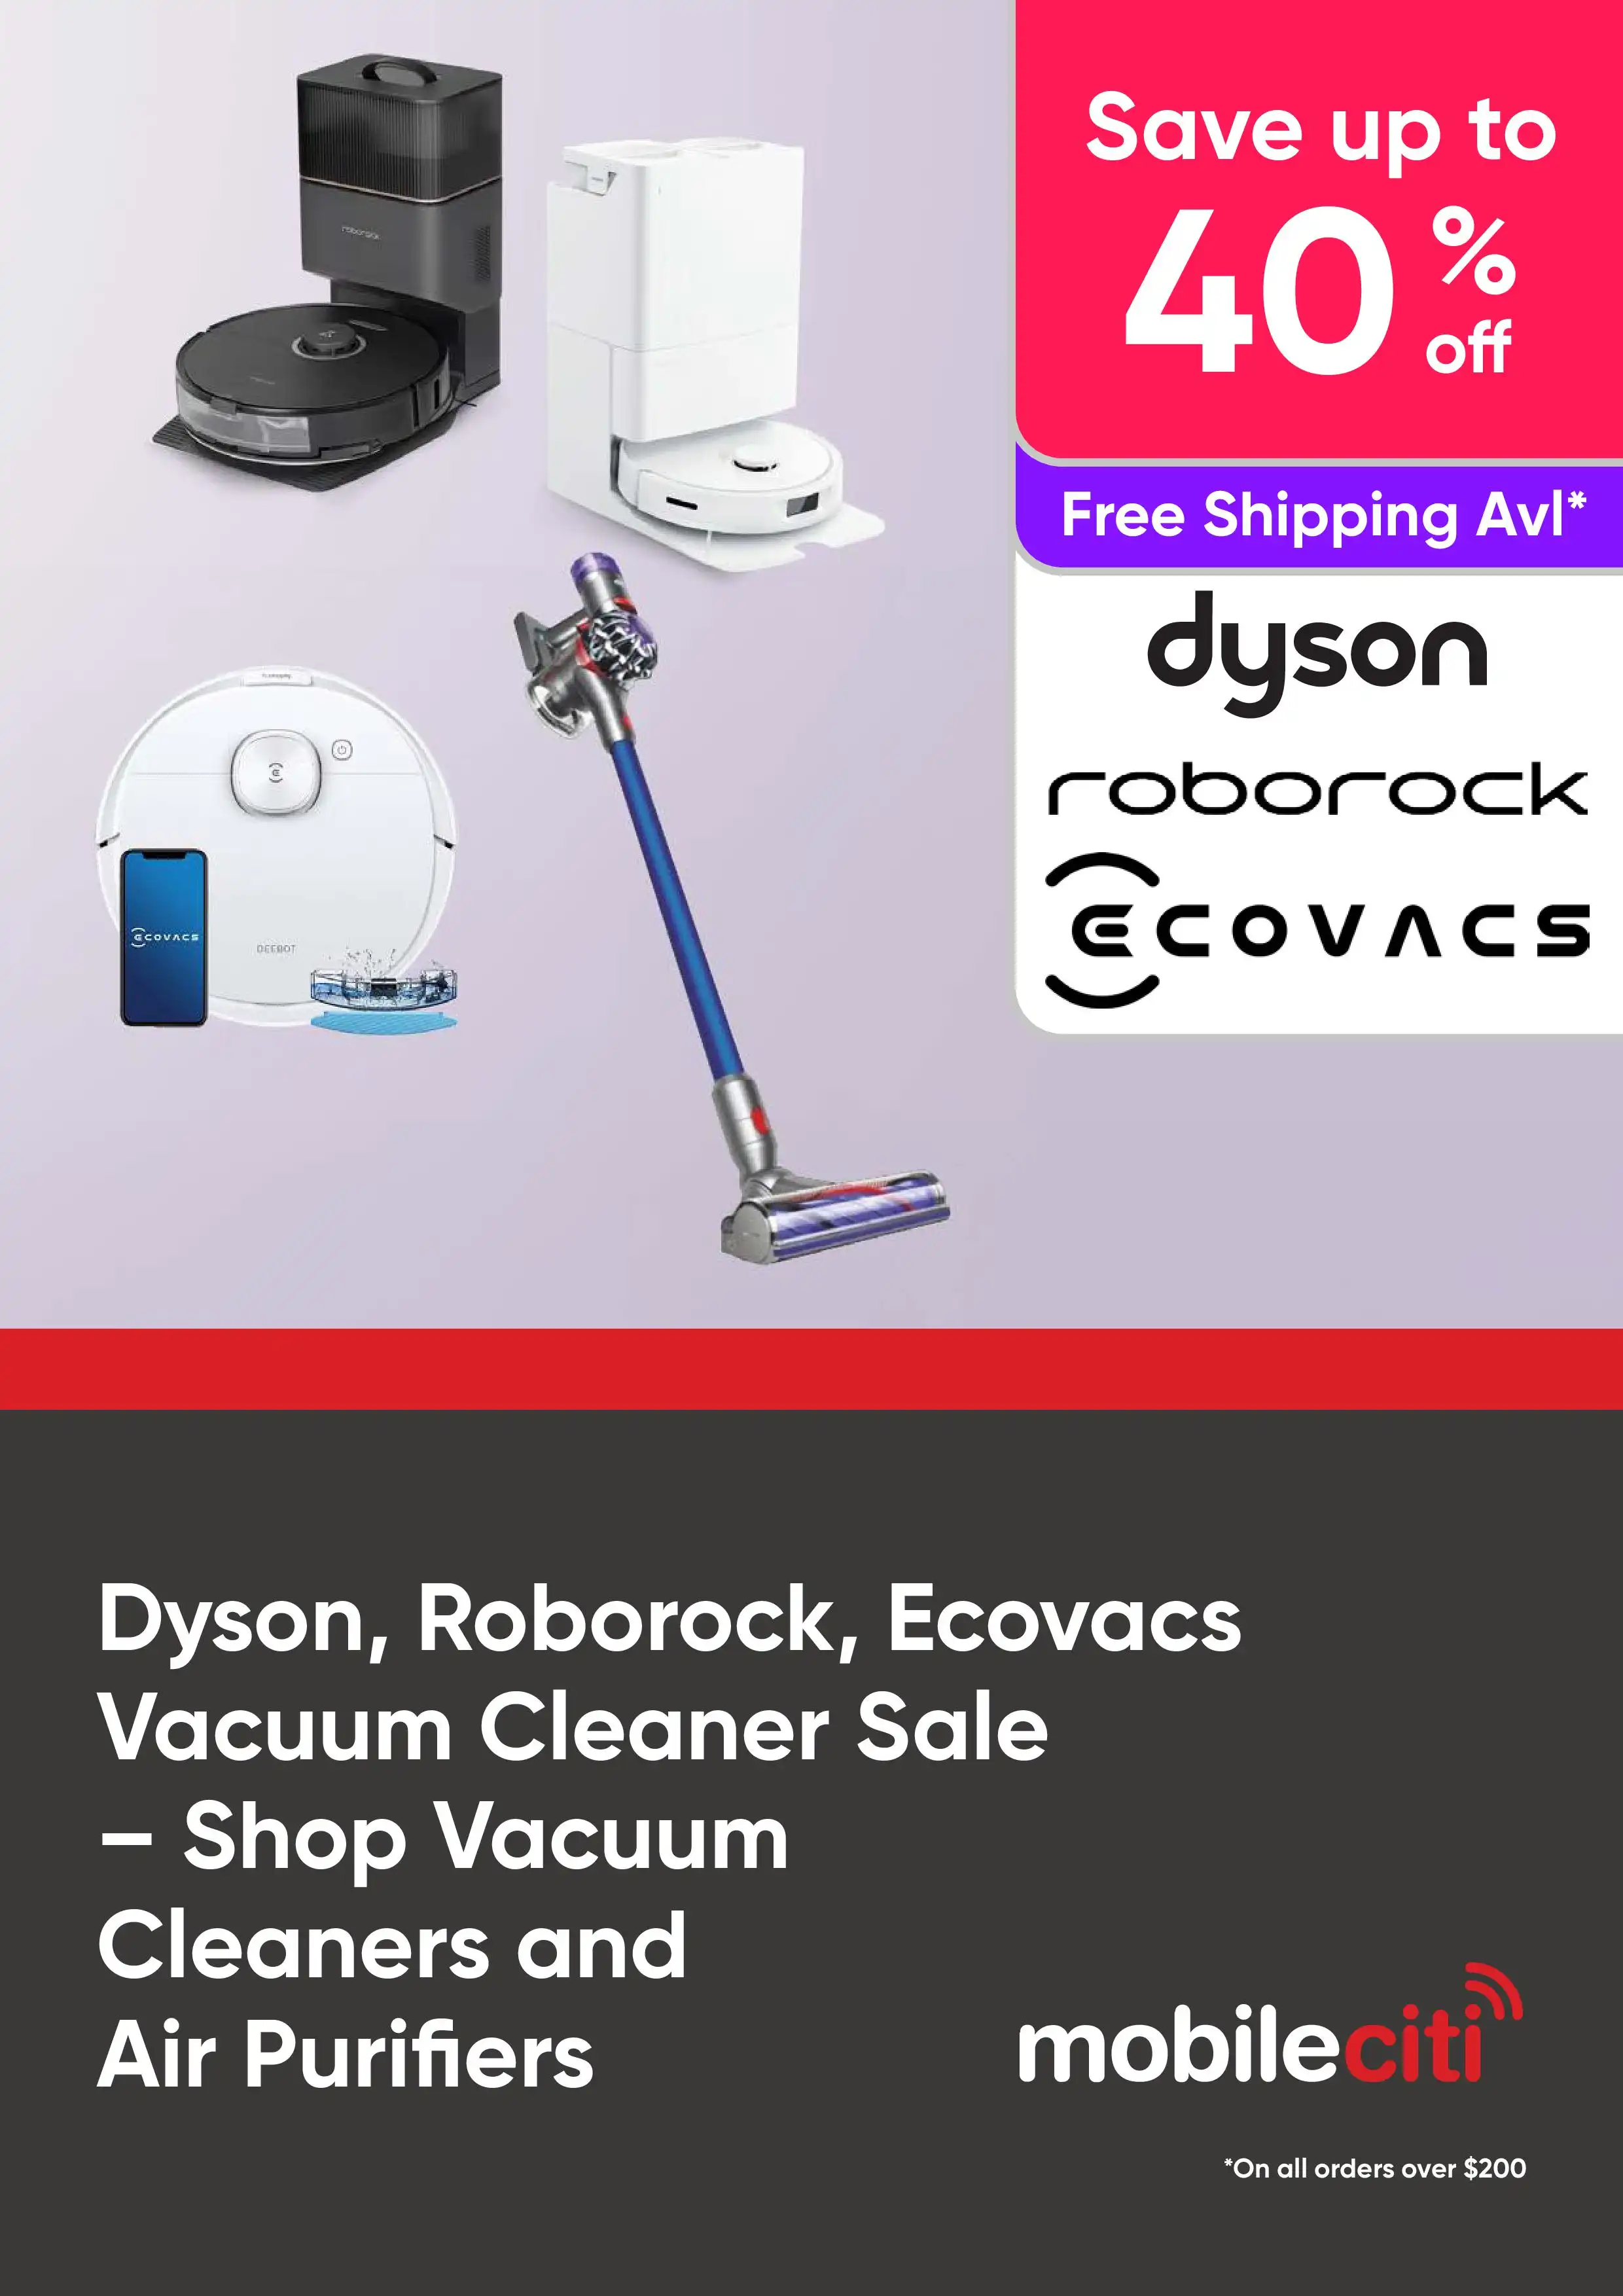 Dyson, Roborcok, Ecovac Vacuum Cleaner Sale - Save Up to 40% Off Vacuum Cleaners and Air Purifiers